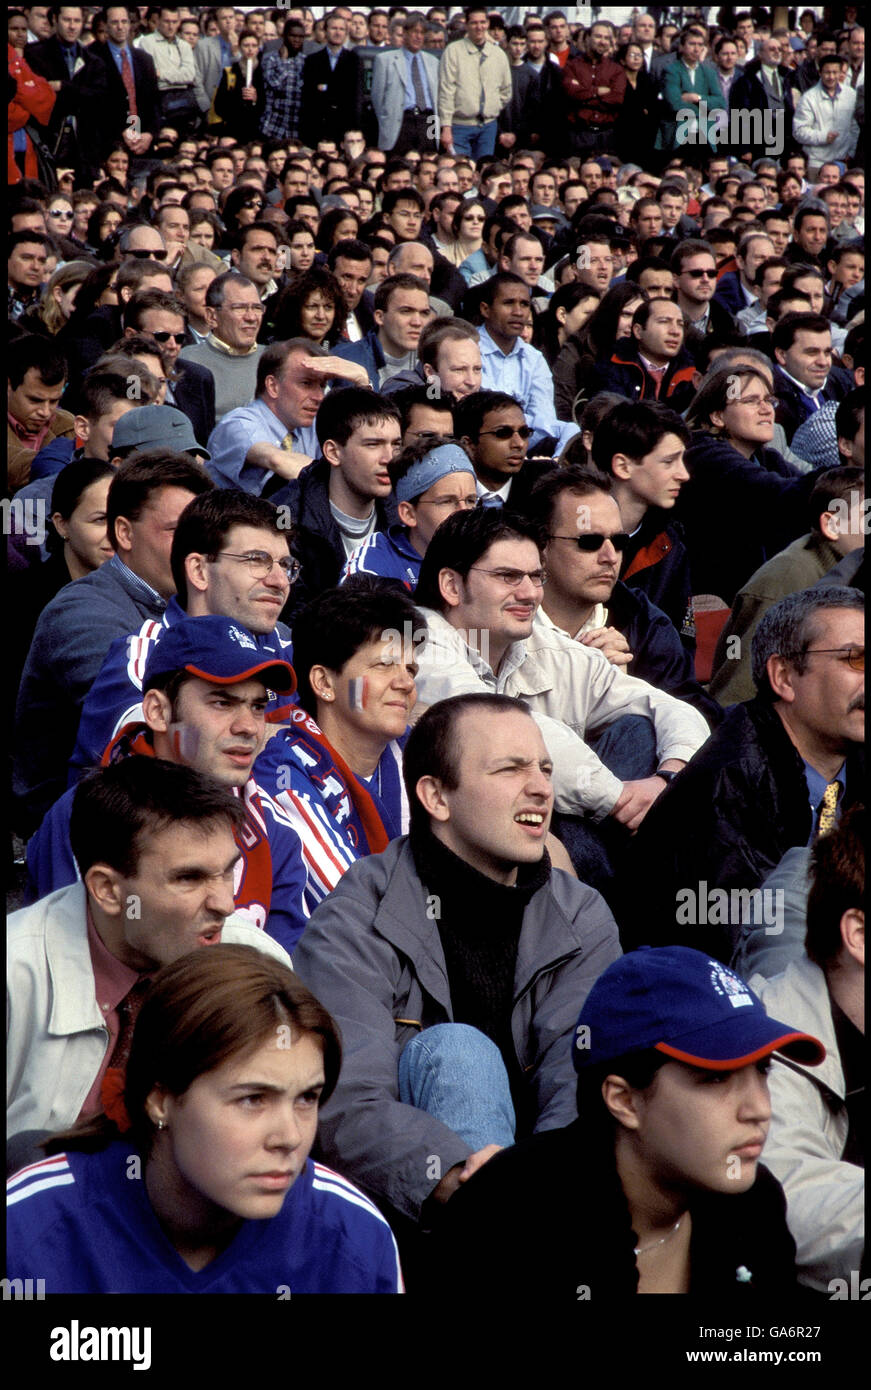 French soccer fans watch game on giant screen June 2002 at La Défense, France. Stock Photo